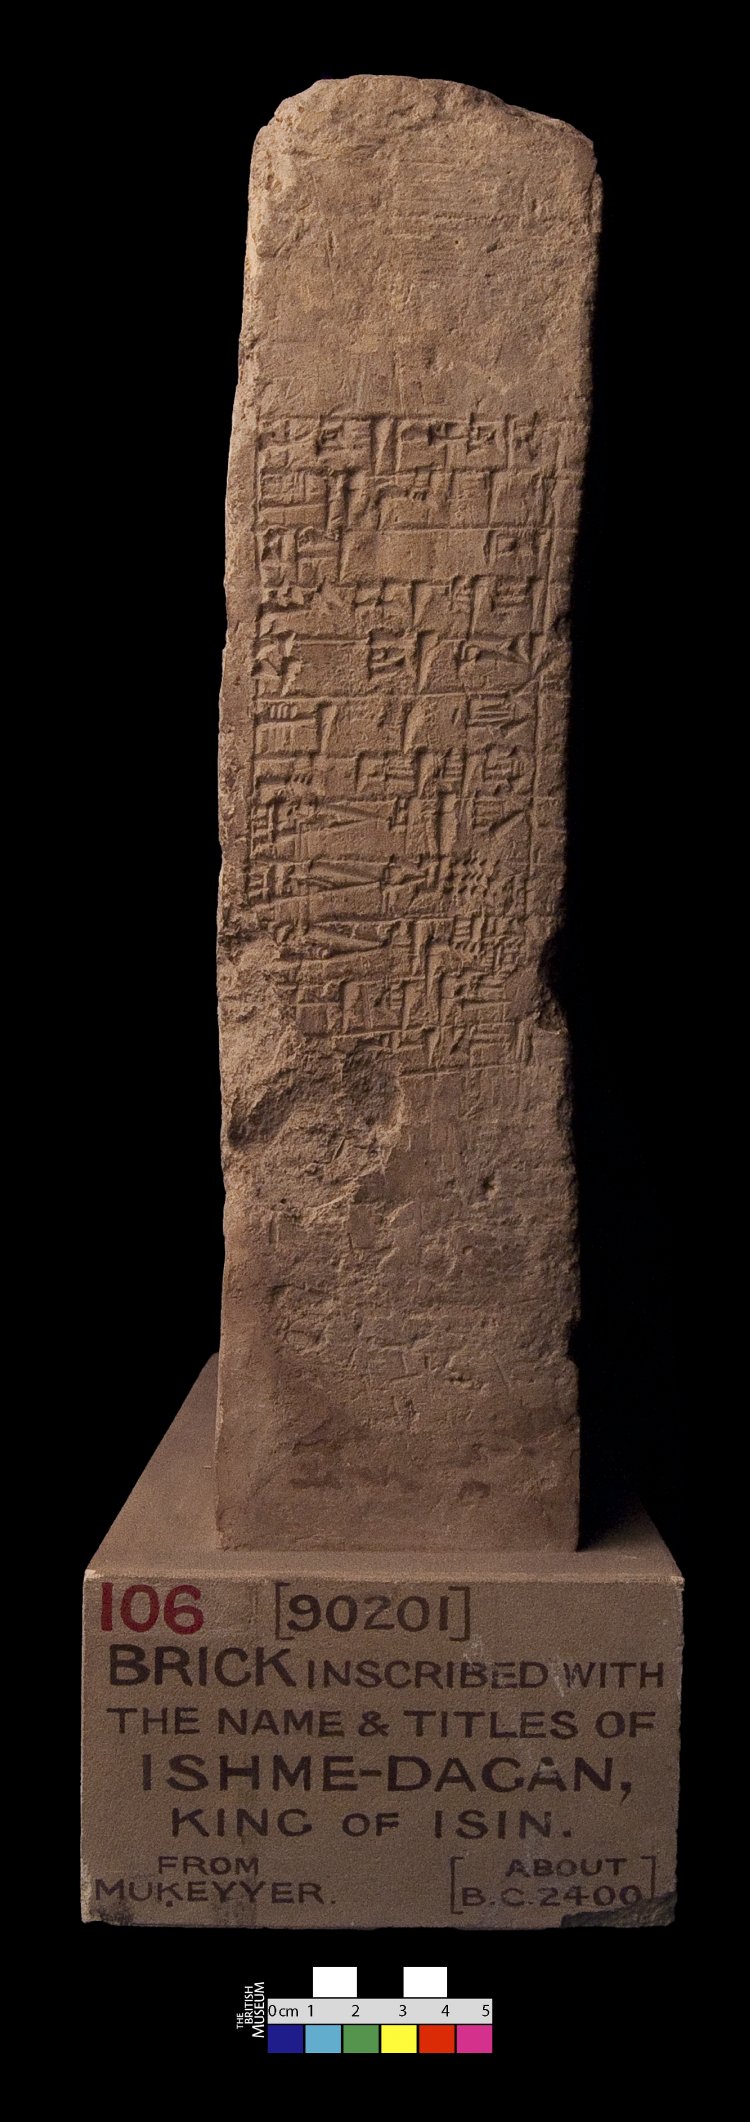 3 - King Ishme Dagan Inscription, artifact of stone so as to last for all time